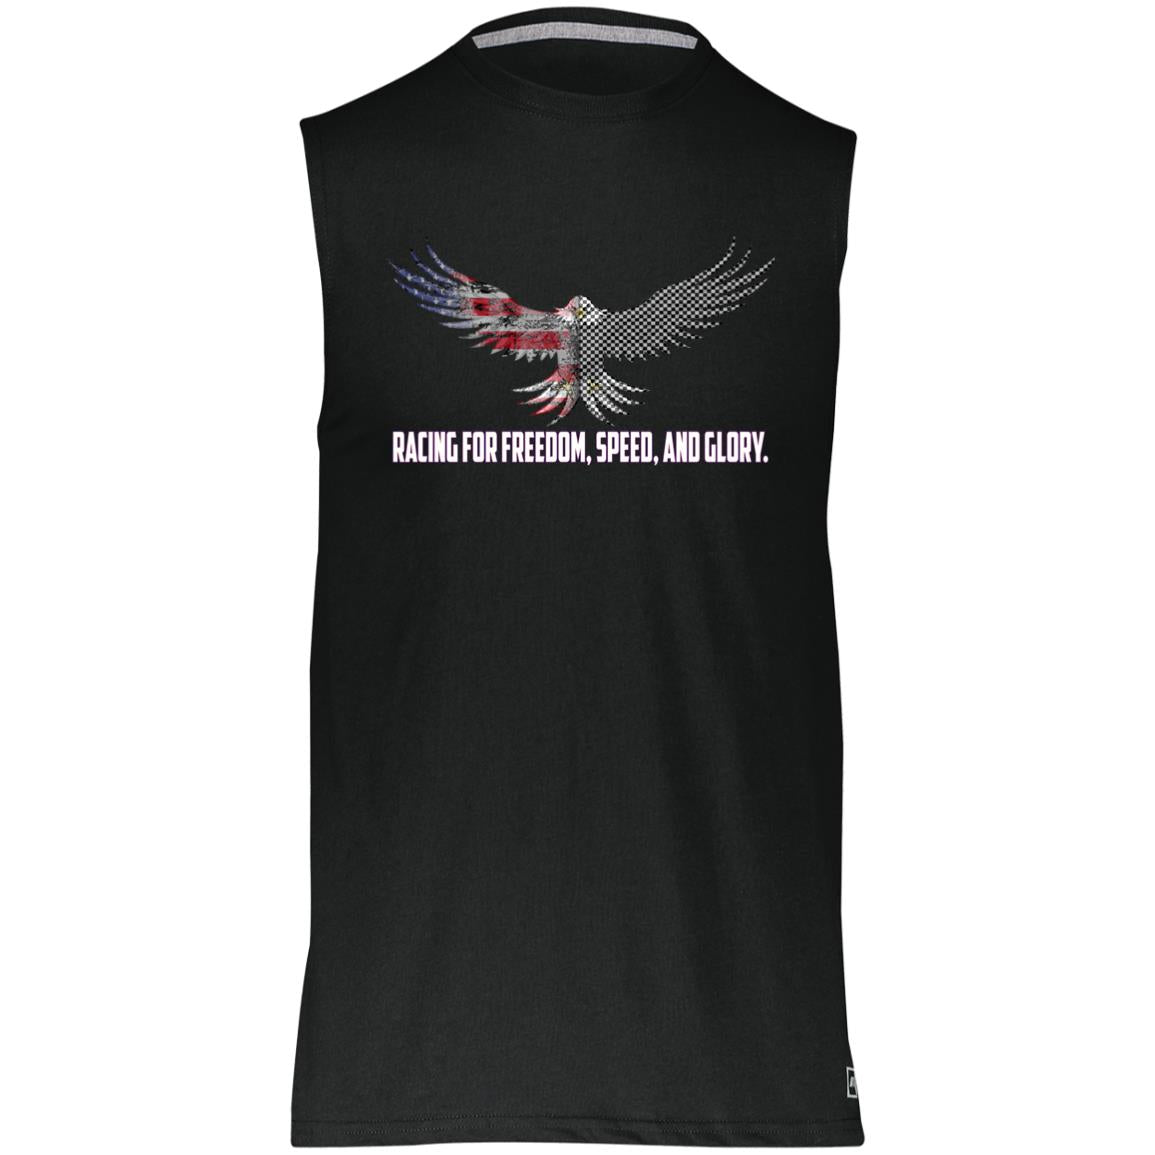 Racing For Freedom, Speed, And Glory Essential Dri-Power Sleeveless Muscle Tee